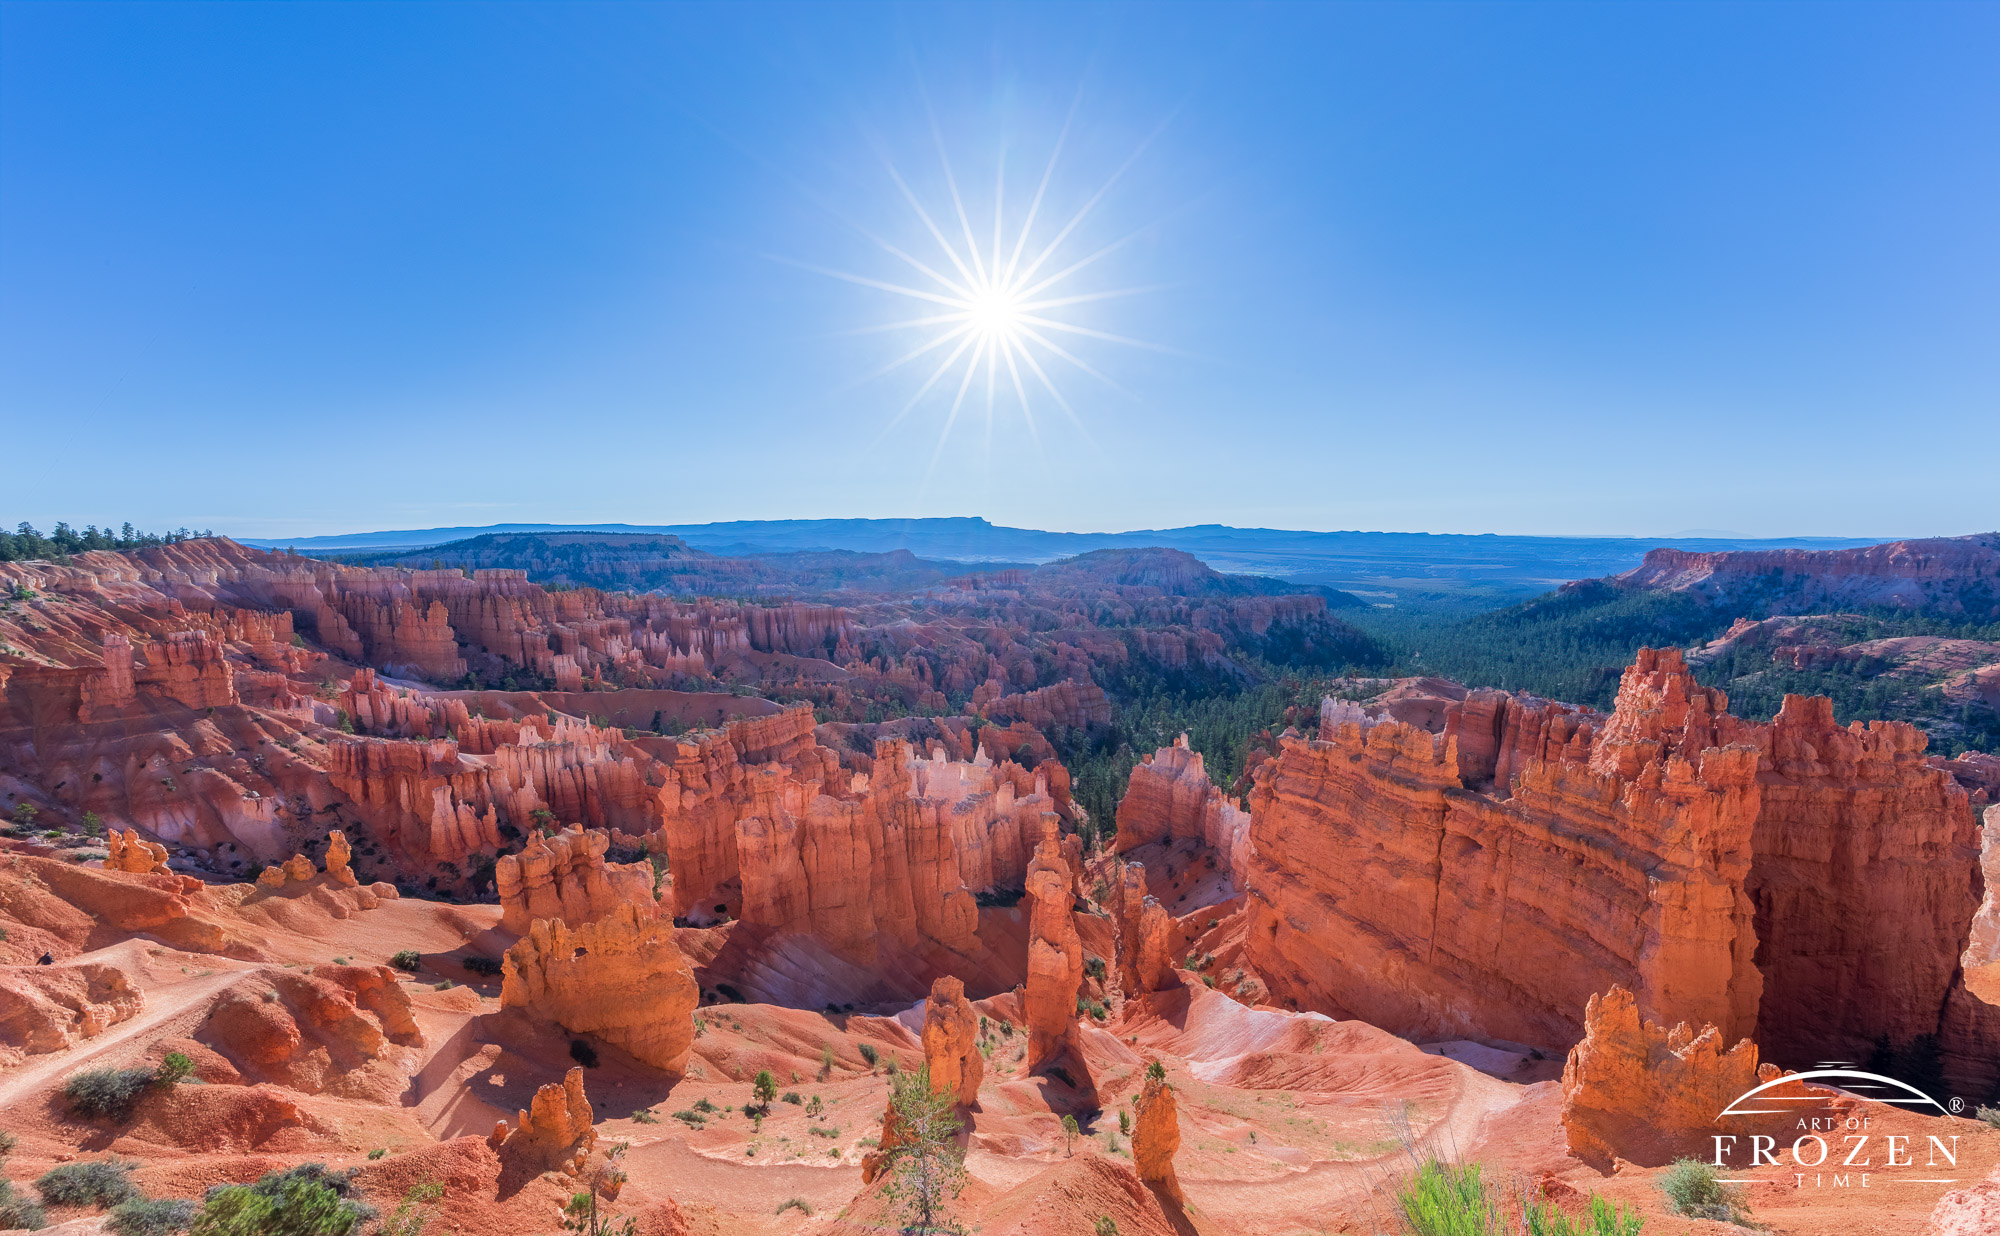 A wide-angle view of Bryce Canyon capturing the vastness of the natural amphitheater as seen from the canyon rim during a summer sunrise